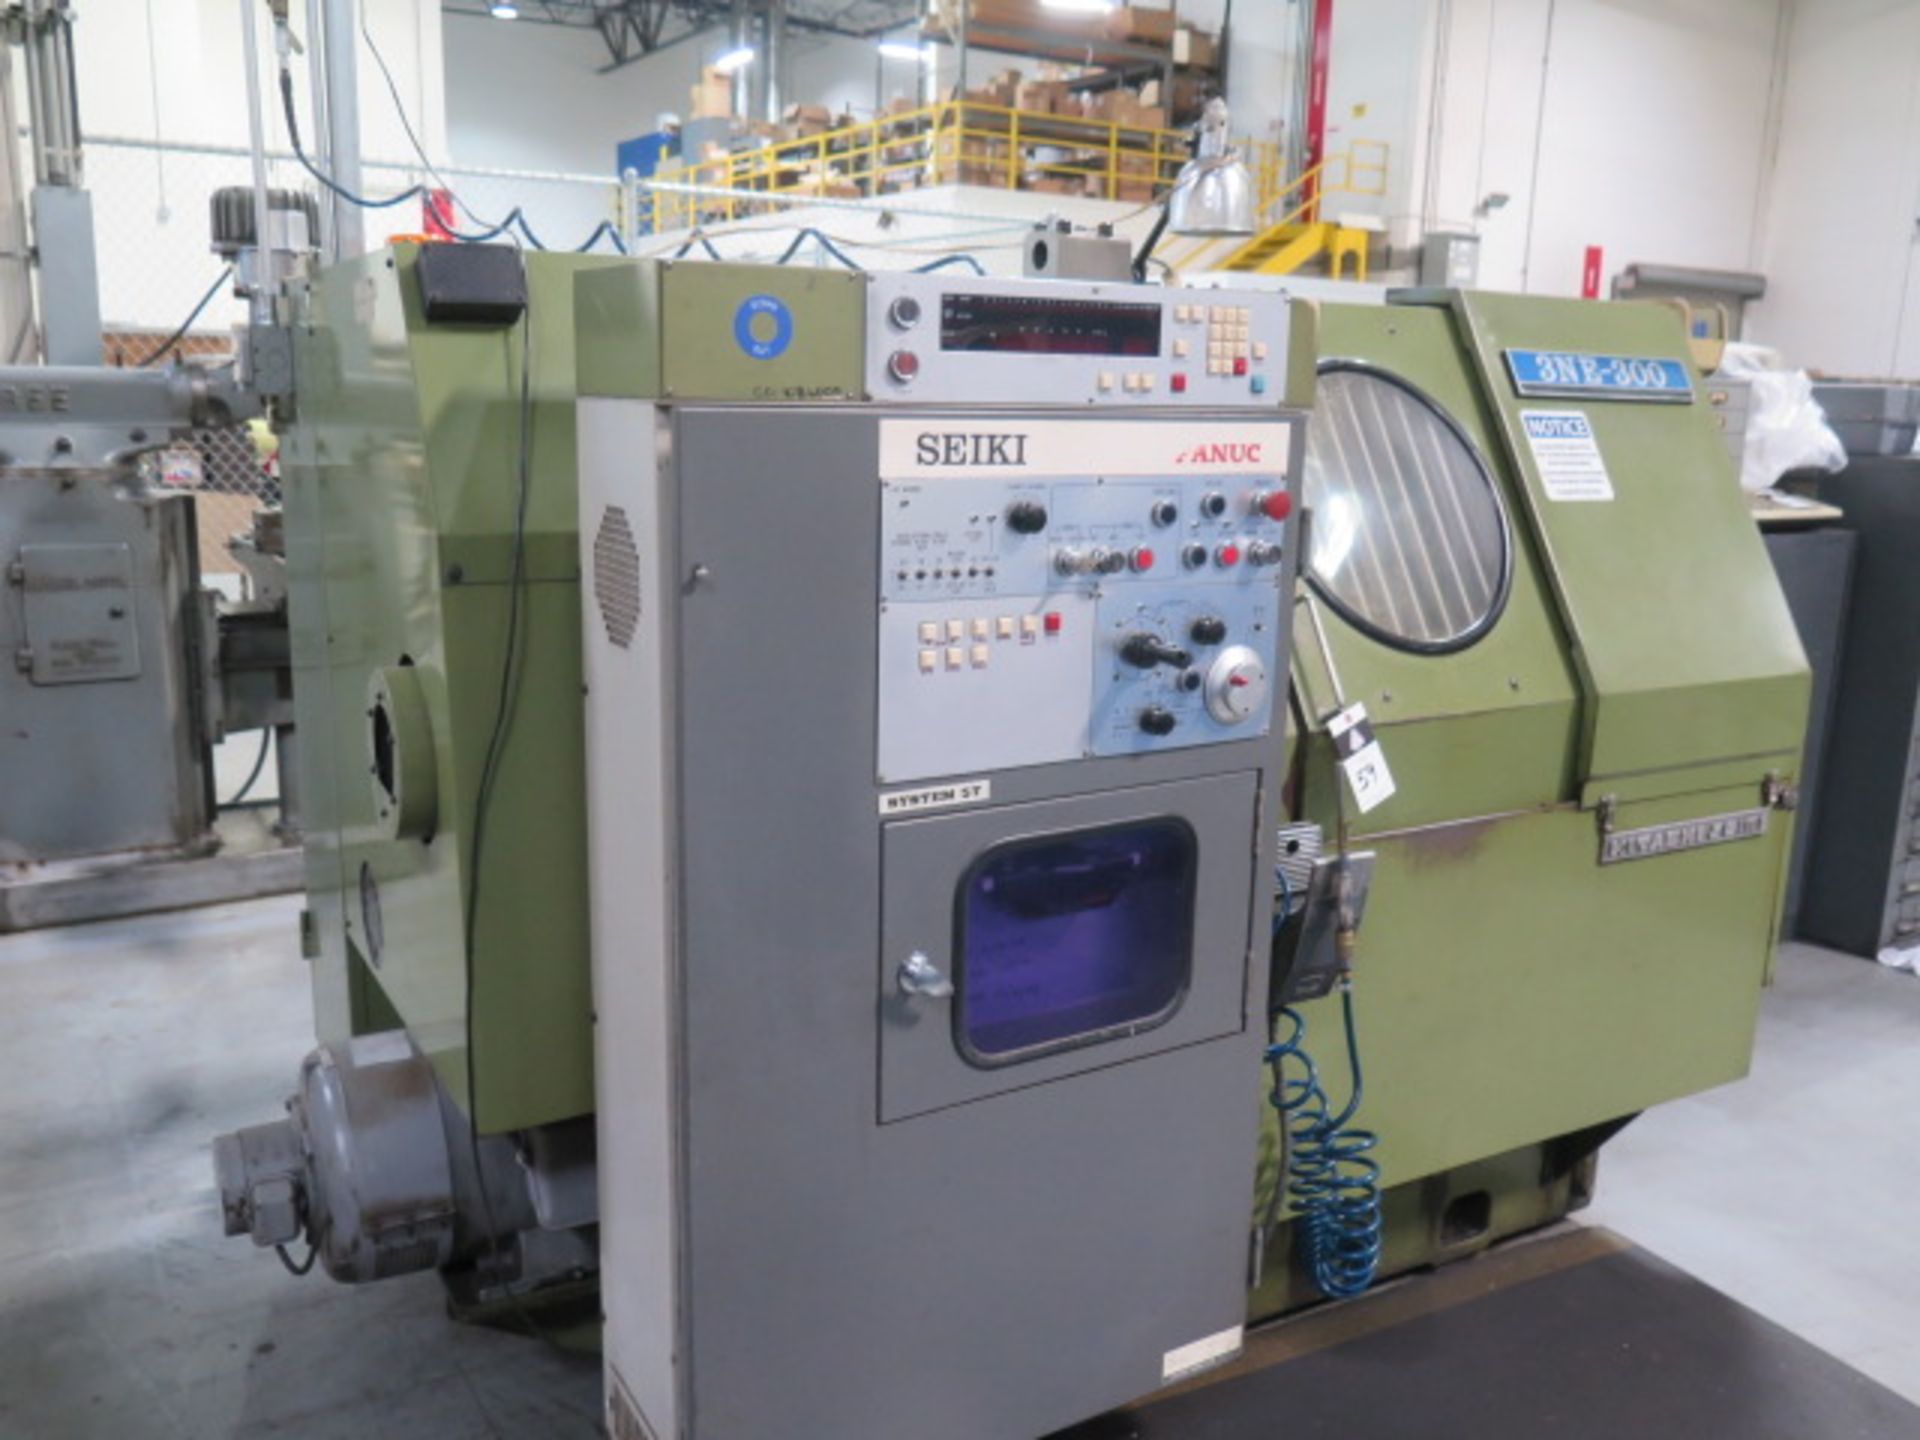 Hitachi Seiki 3NE-300 CNC Turning Center w/ Fanuc System 5T Controls, 12-Station Turret, SOLD AS IS - Image 3 of 10